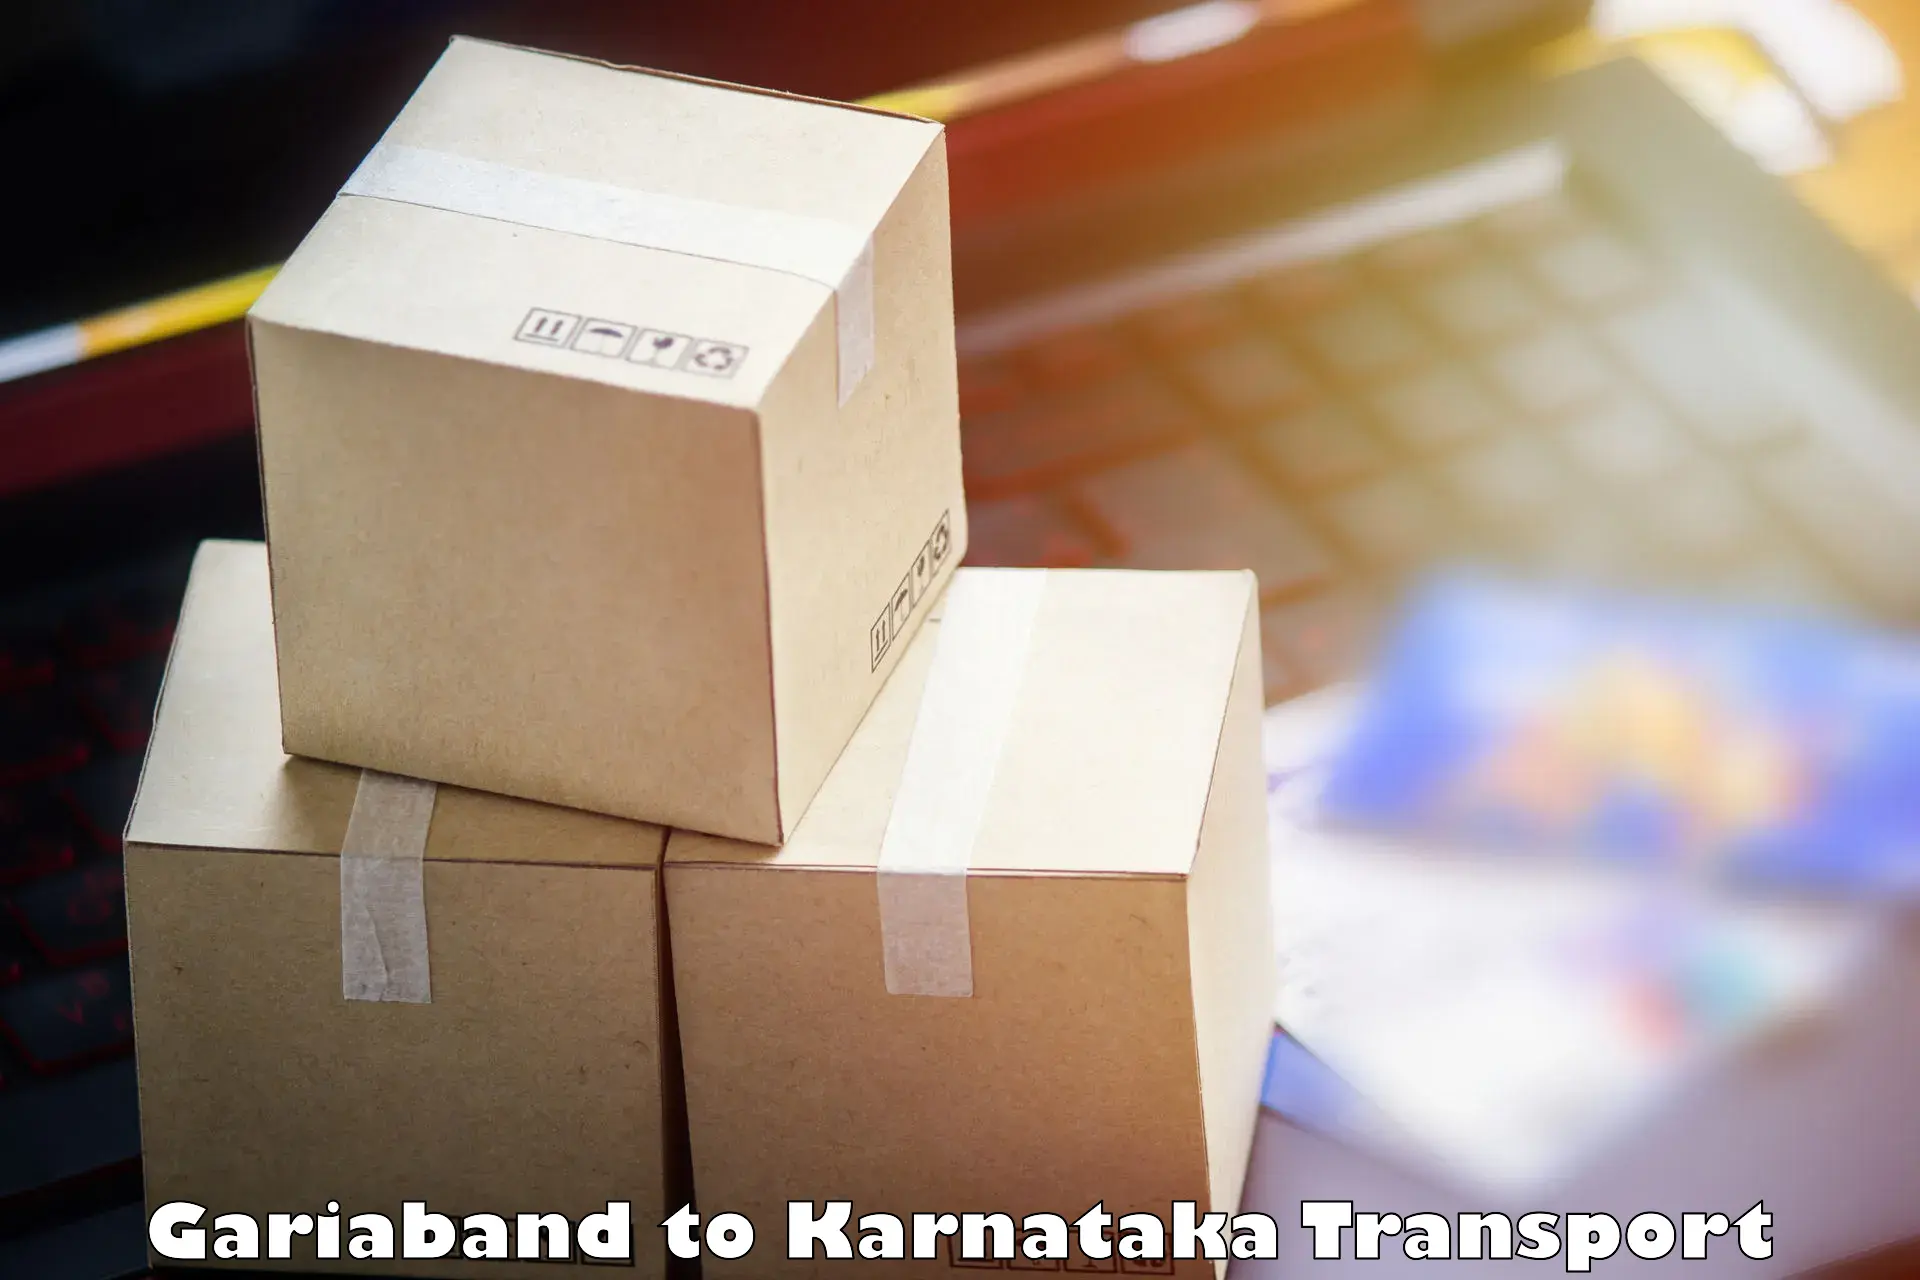 Parcel transport services Gariaband to Yellare